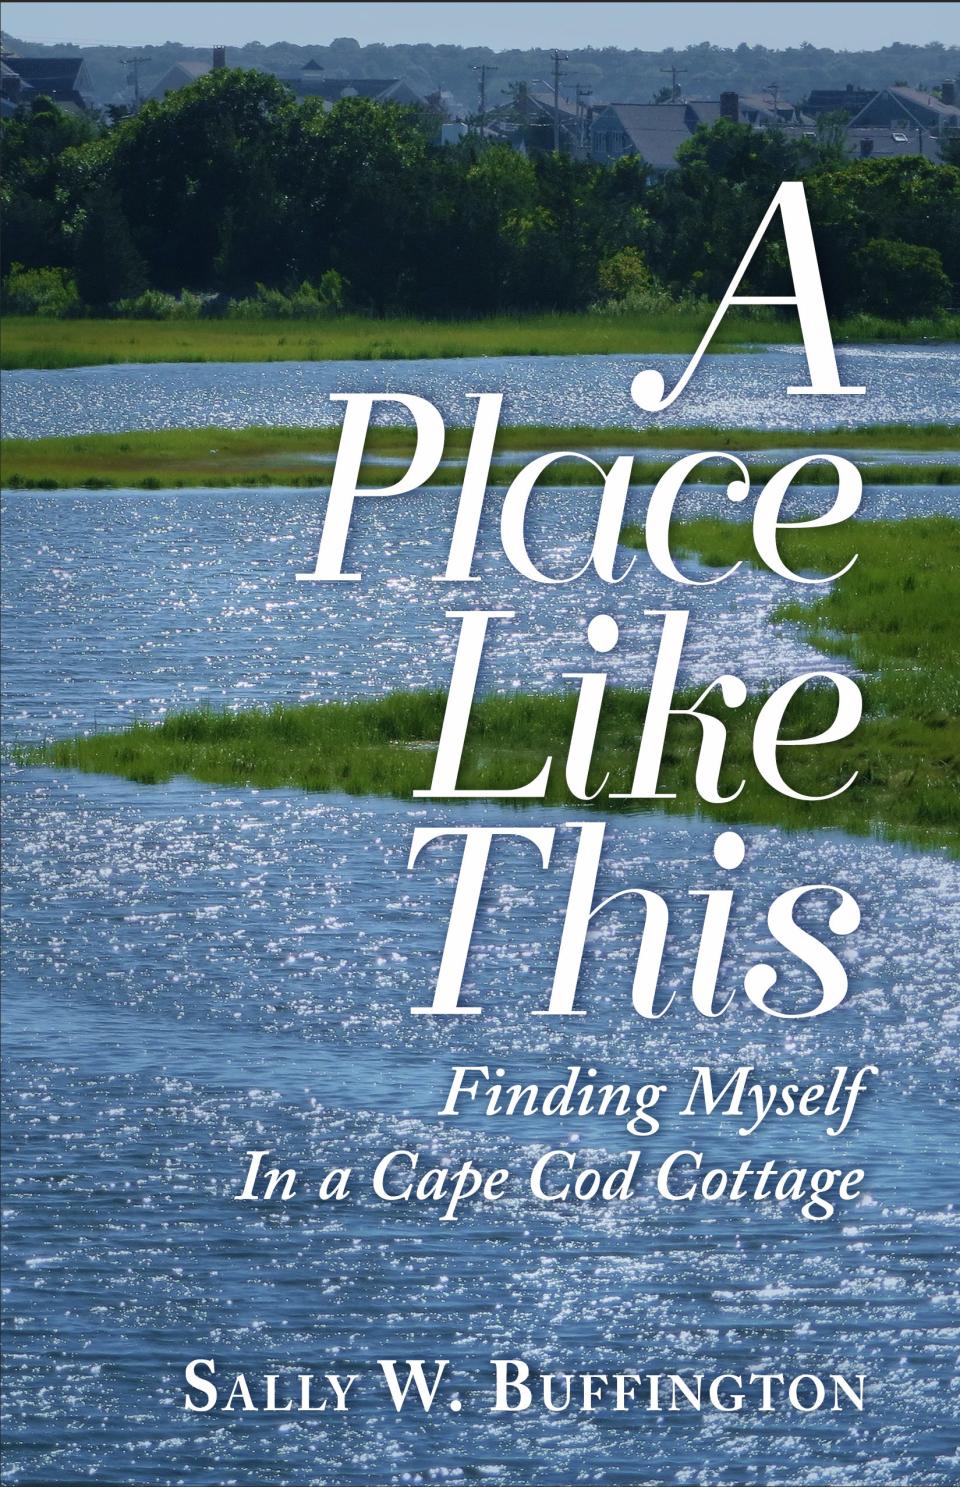 “A Place Like This: Finding Myself in a Cape Cod Cottage,” by Sally Buffington